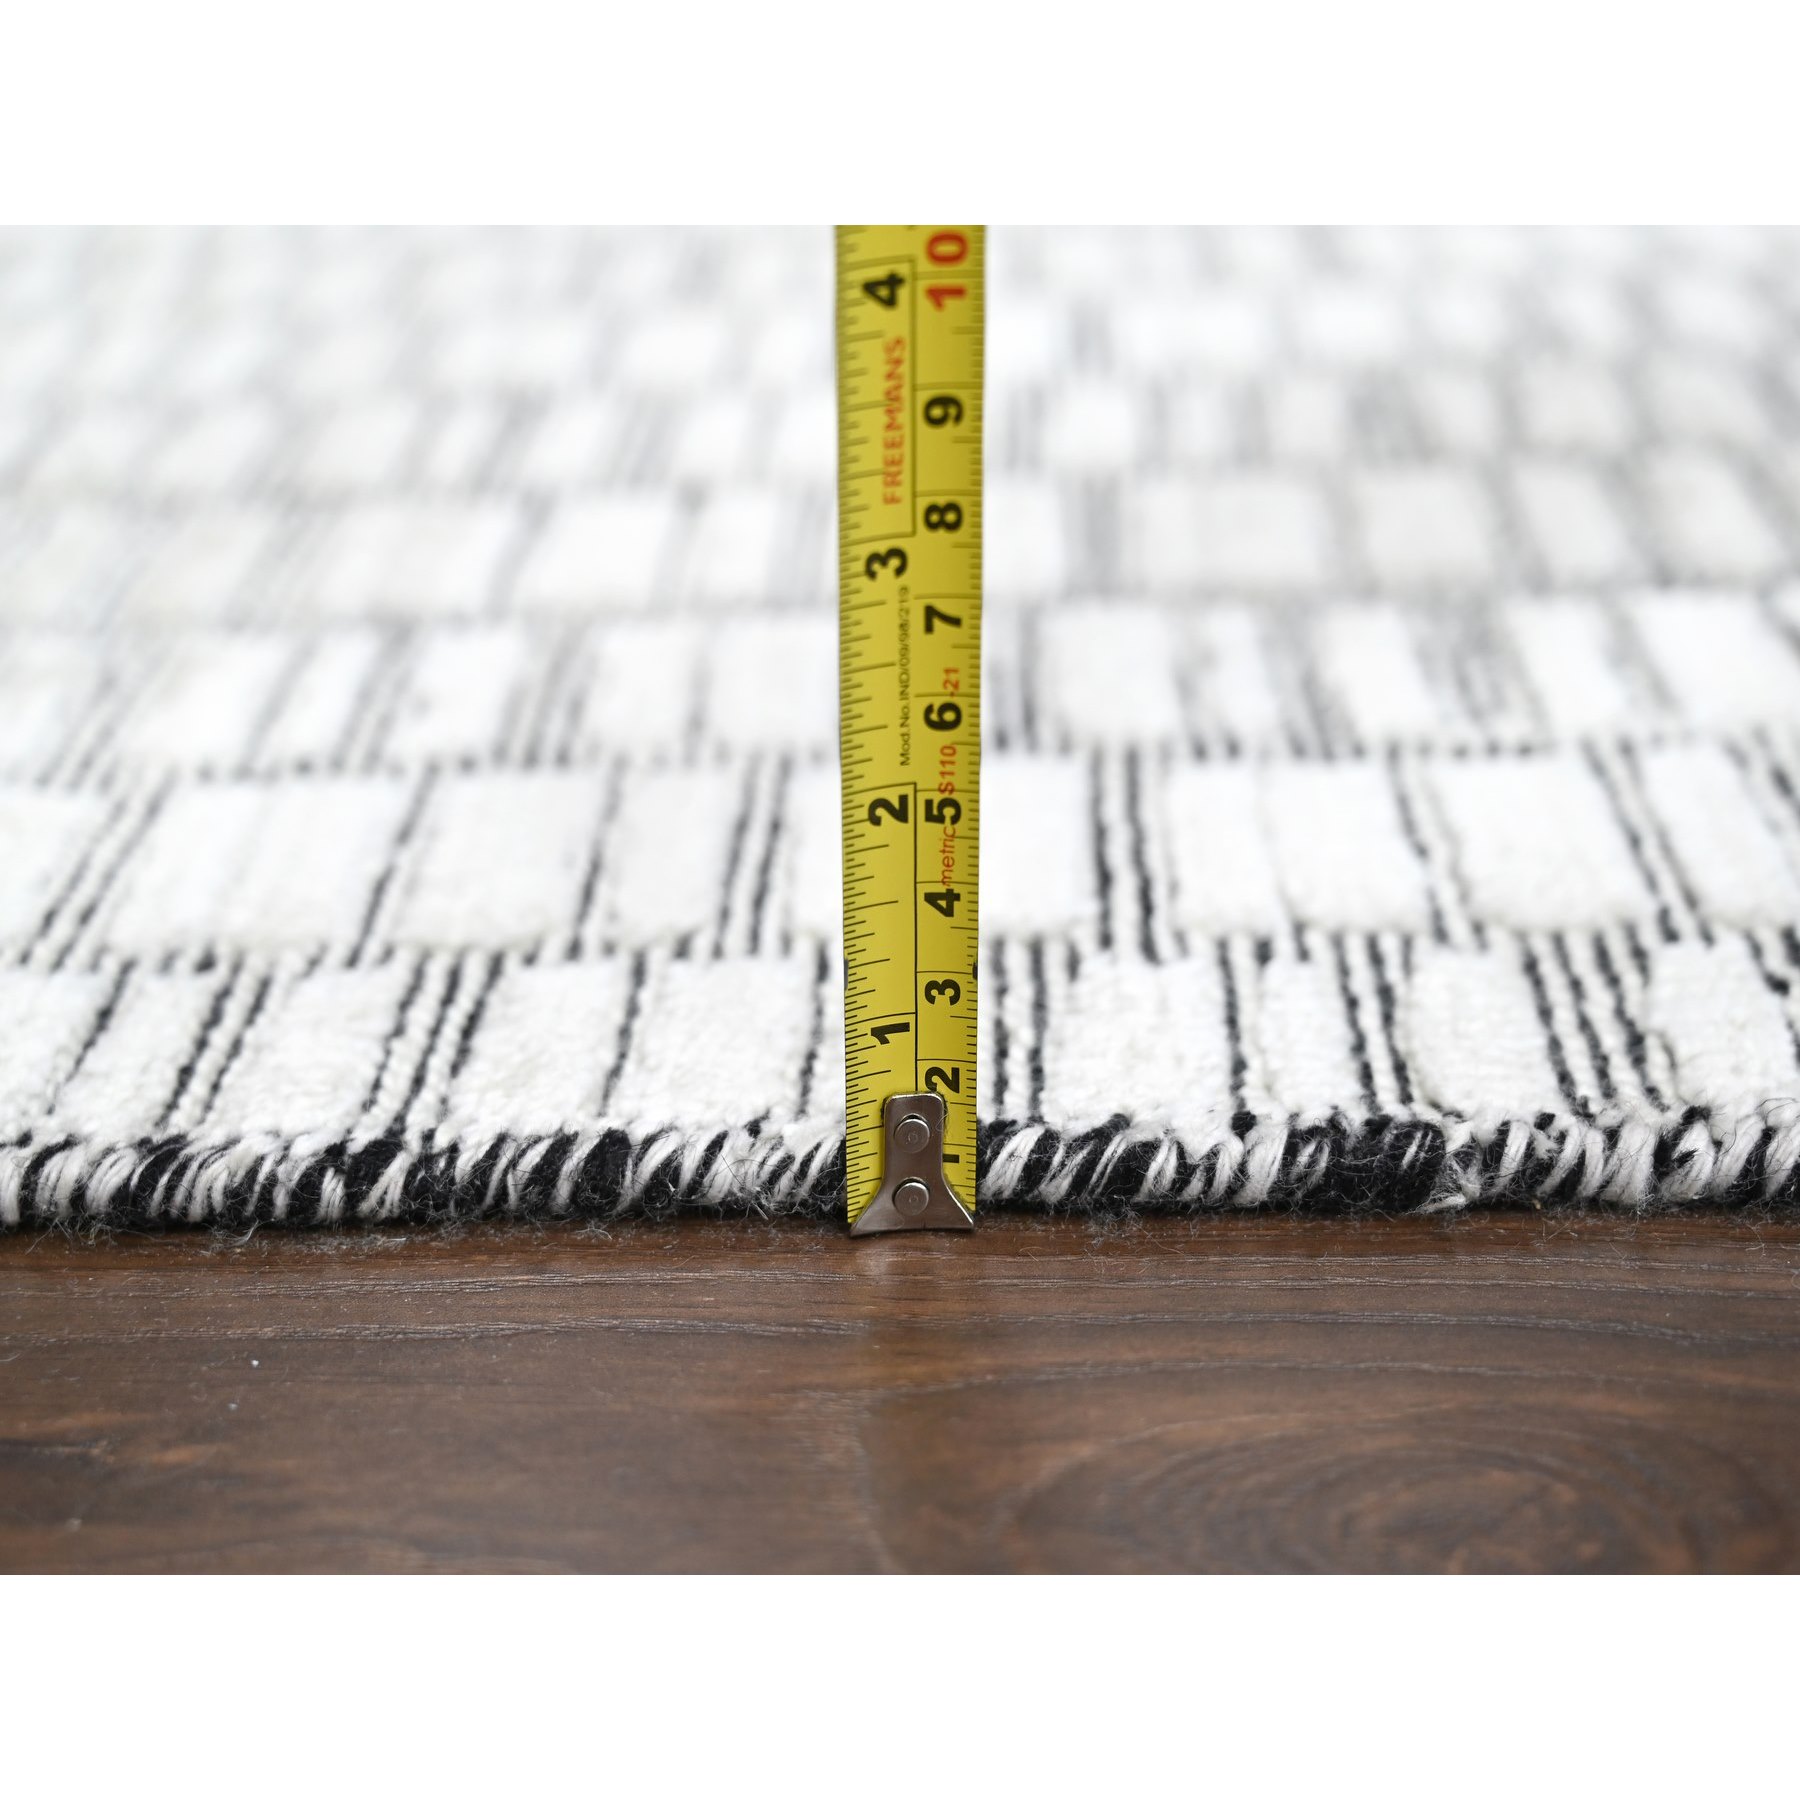 Modern-and-Contemporary-Hand-Loomed-Rug-422940